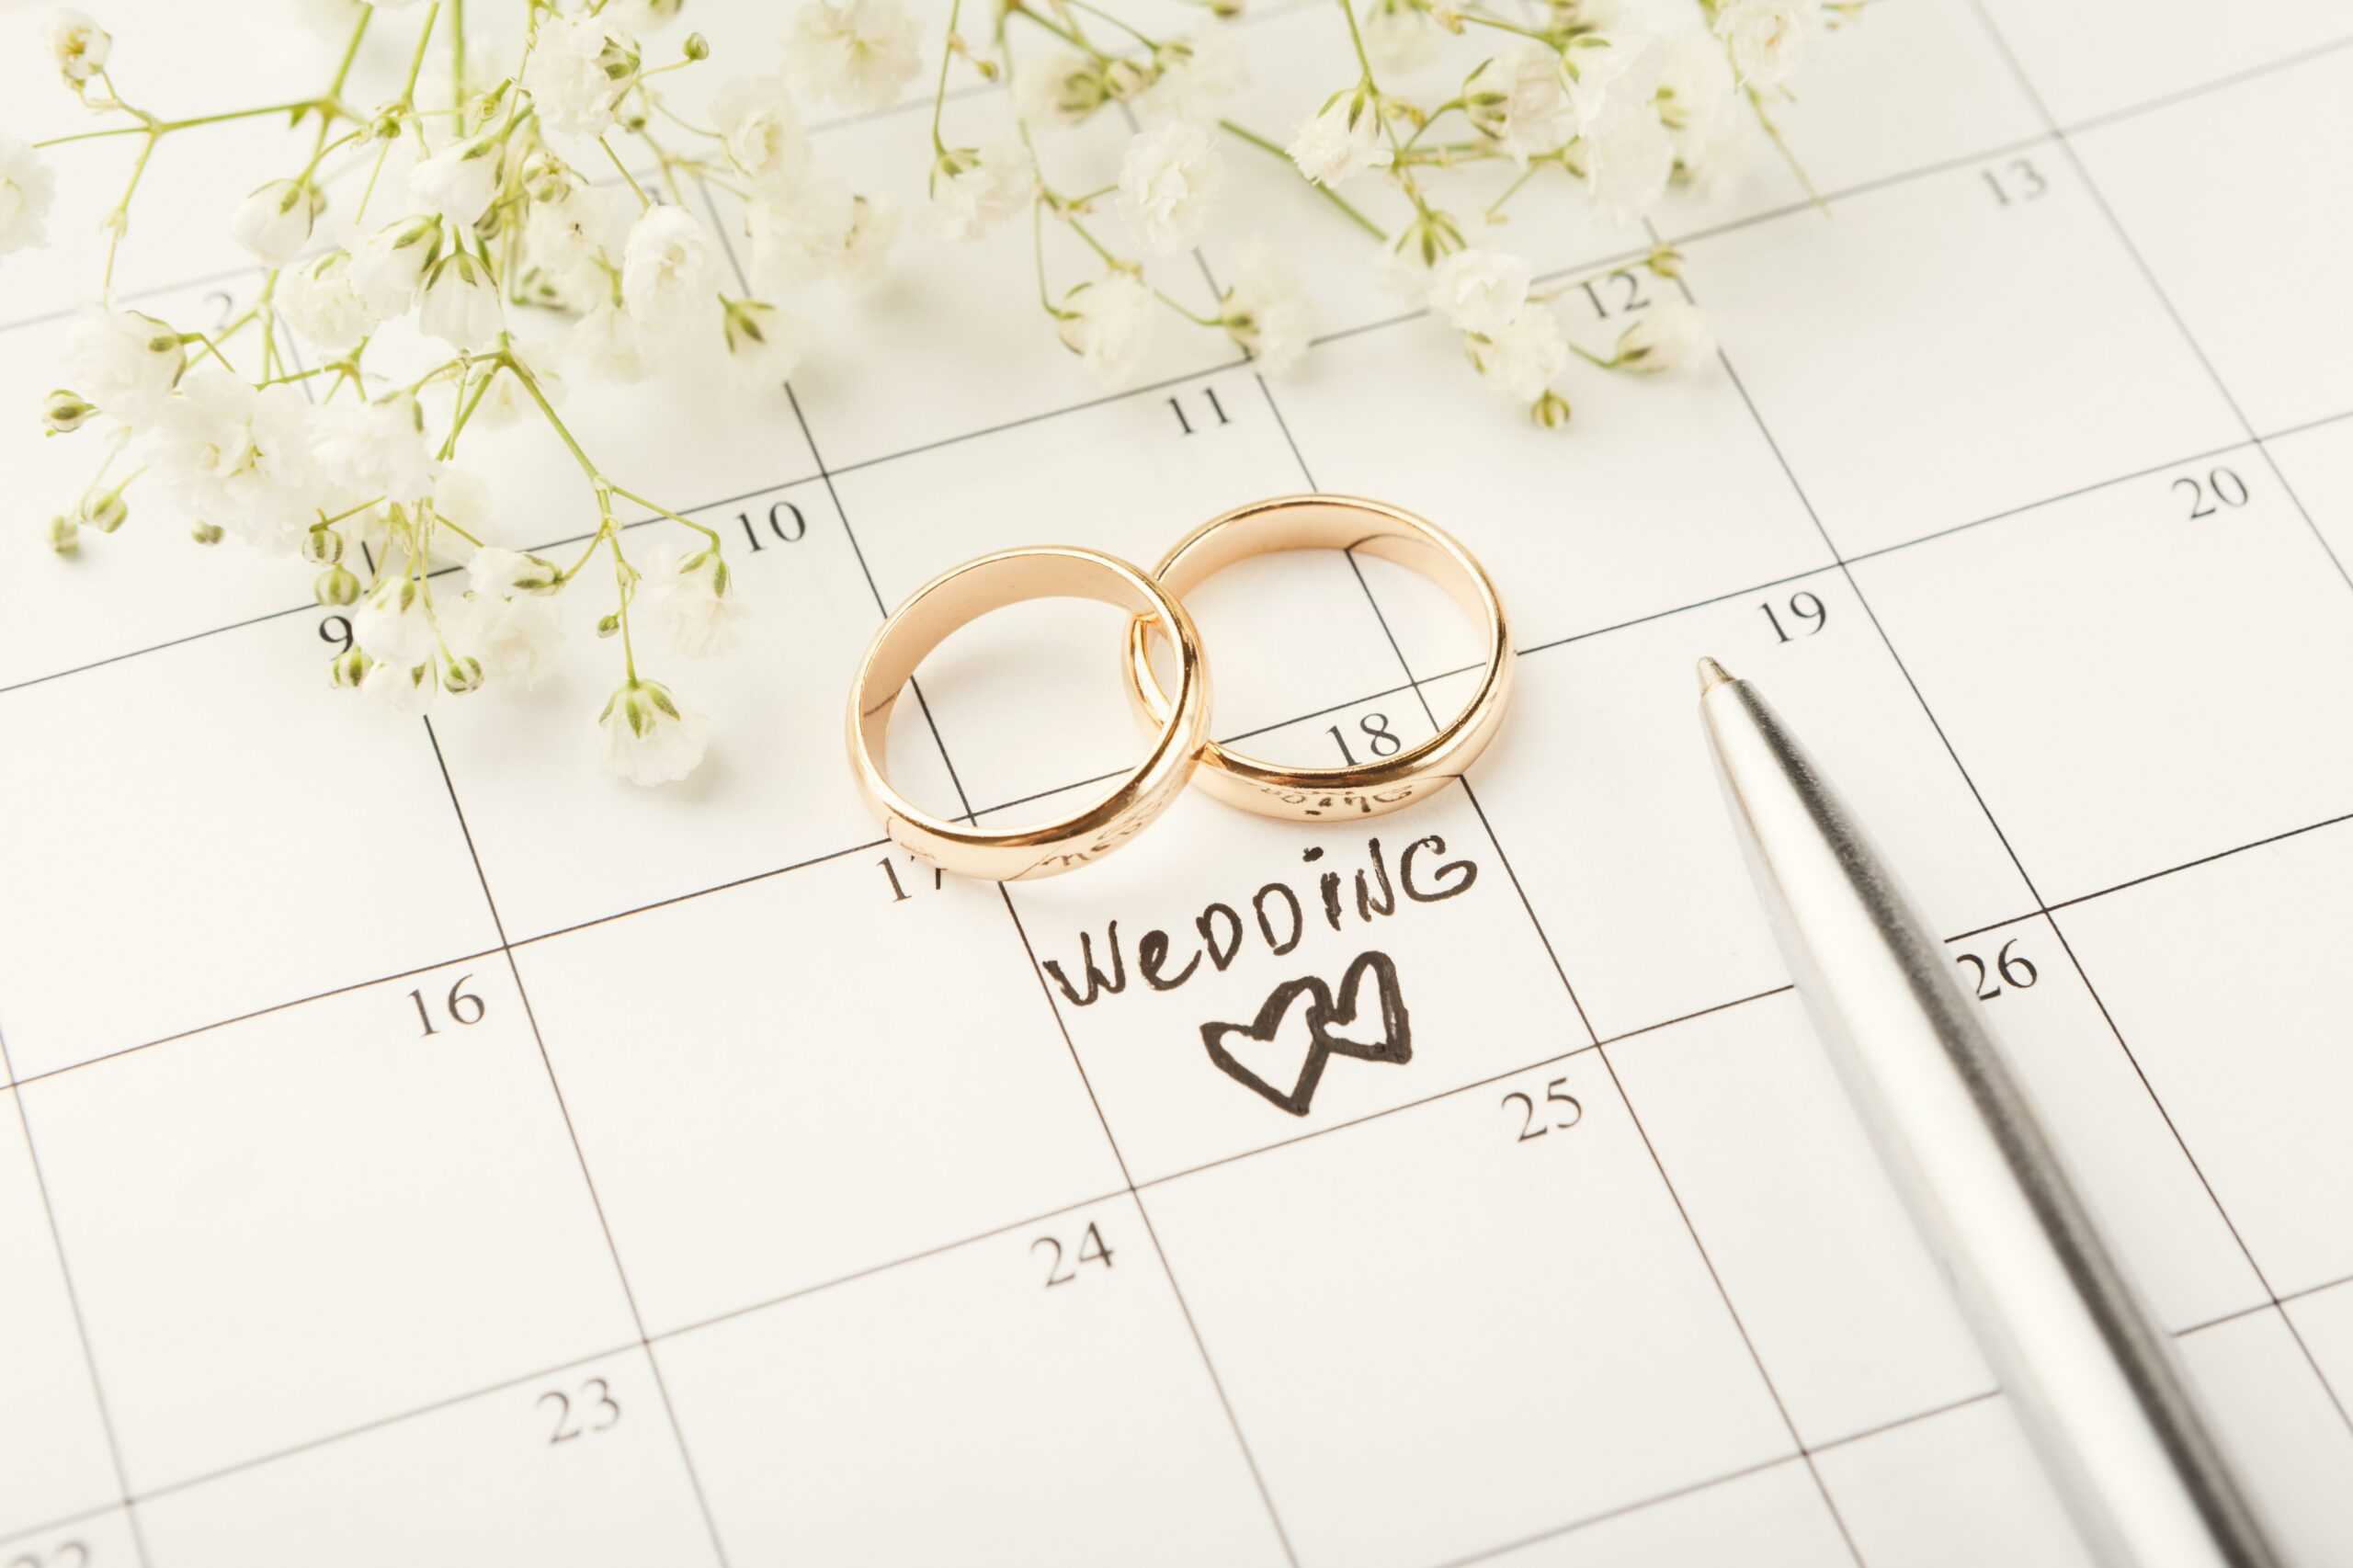  Organize your Big Day with Our Wedding Planner